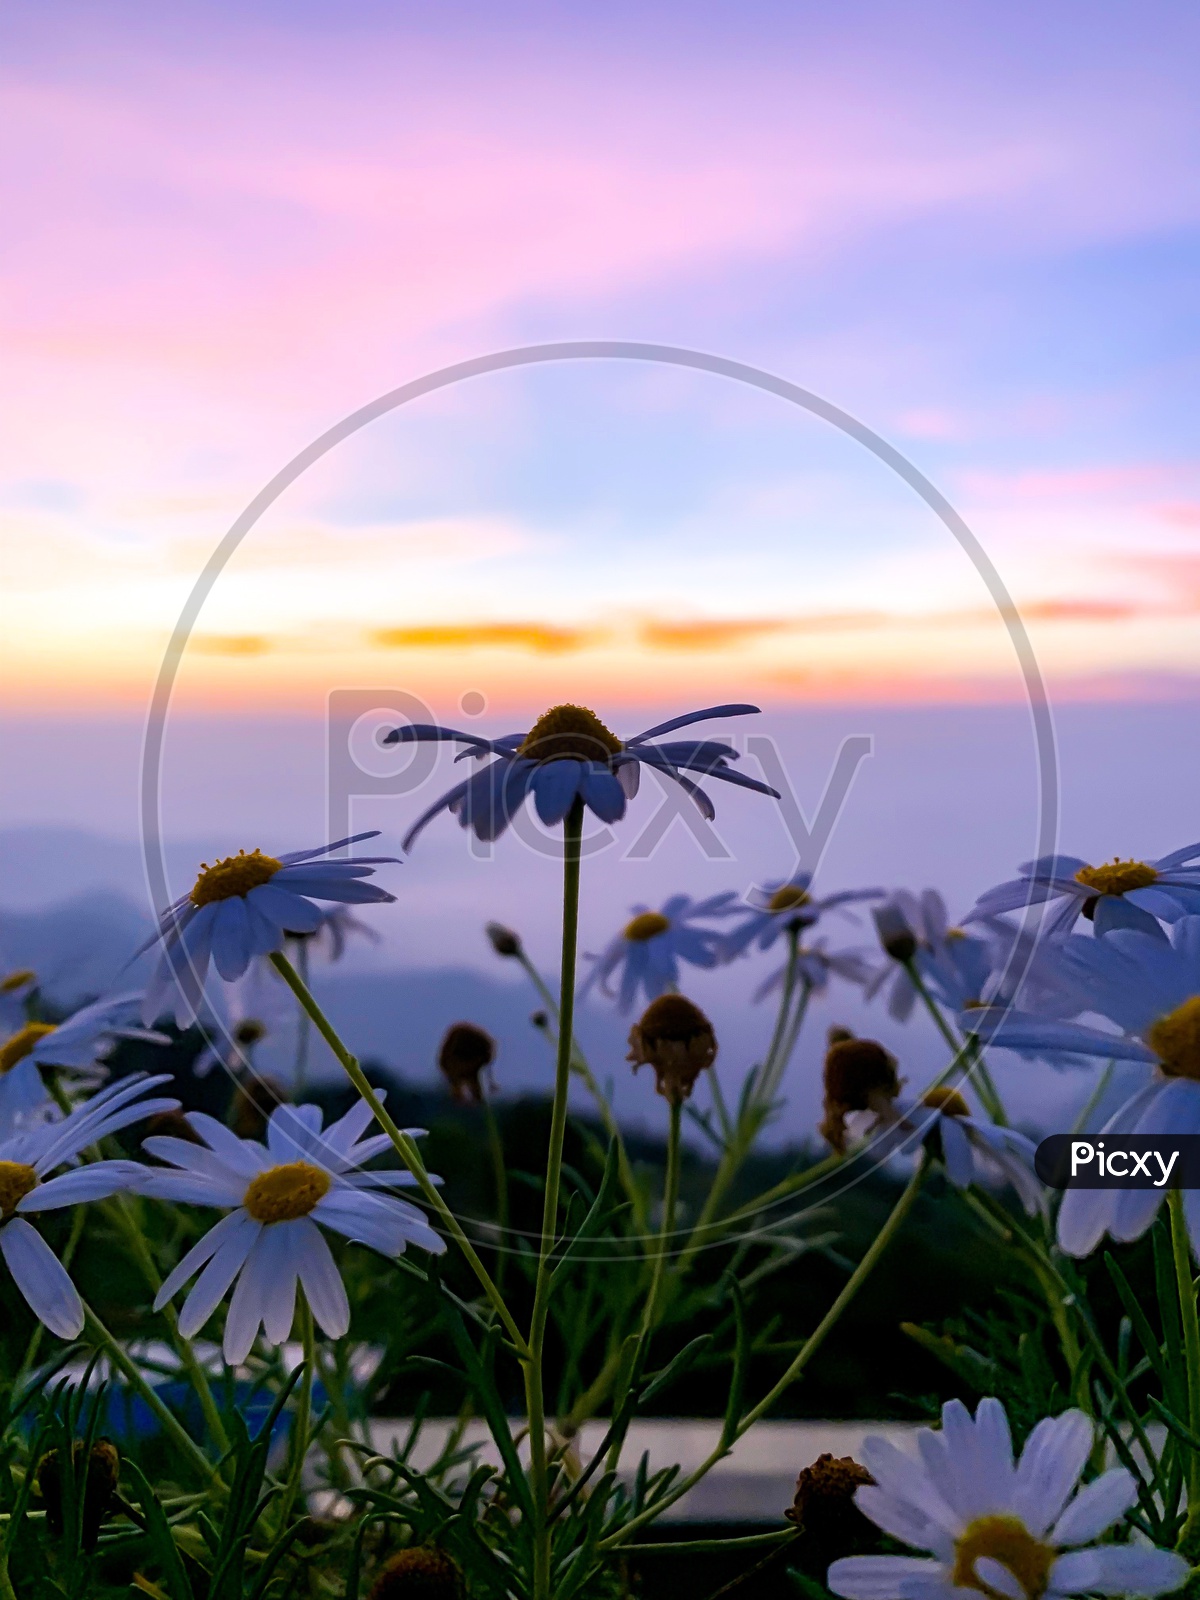 Oxeye Daisy Flowers With  Sunset Sky In Background